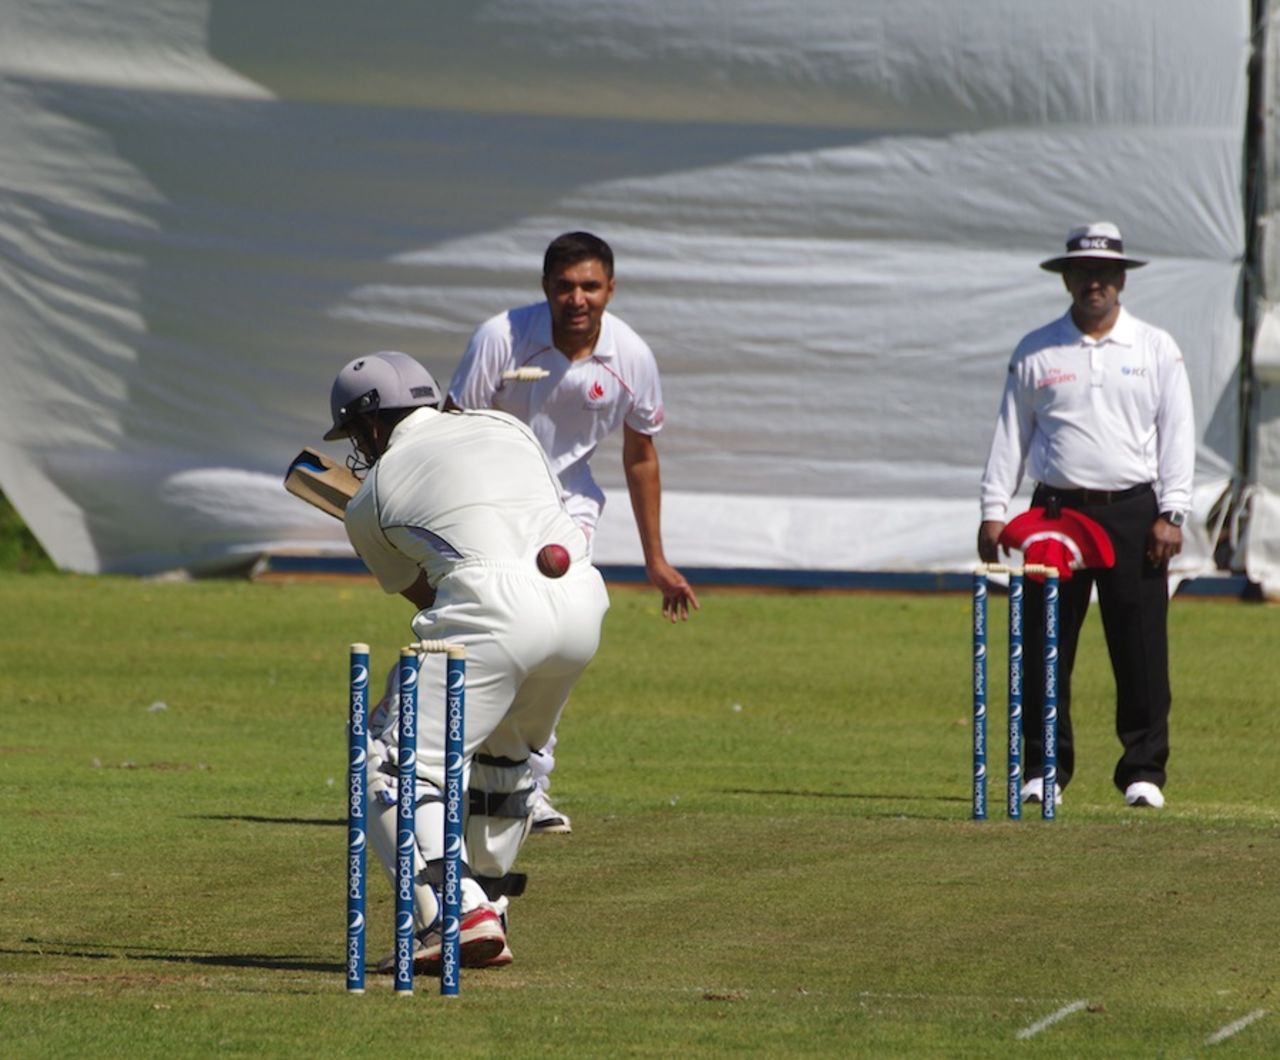 Mohammad Azam is bowled by Harvir Baidwan, Canada v United Arab Emirates, ICC Intercontinental Cup, 3rd day, August 3, 2013